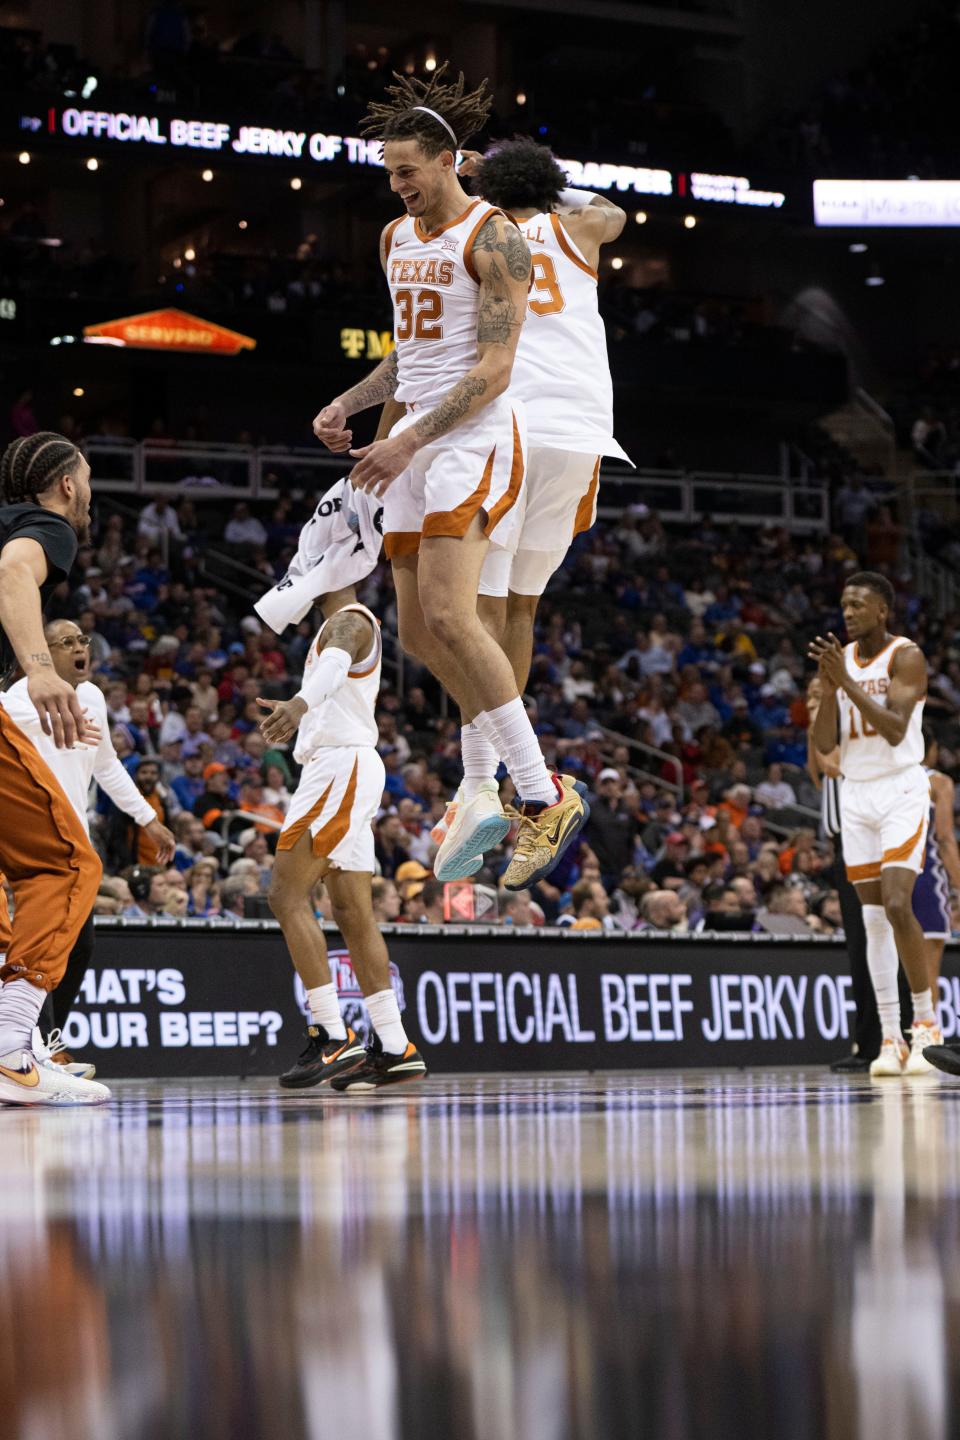 Texas forwards Christian Bishop and Dillon Mitchell celebrate a play during the Longhorns' win over TCU during the Big 12 Tournament. The Longhorns, who went on to beat Kansas in the title game, enter this week's NCAA Tournament with a lot of momentum. They're a No. 2 seed.